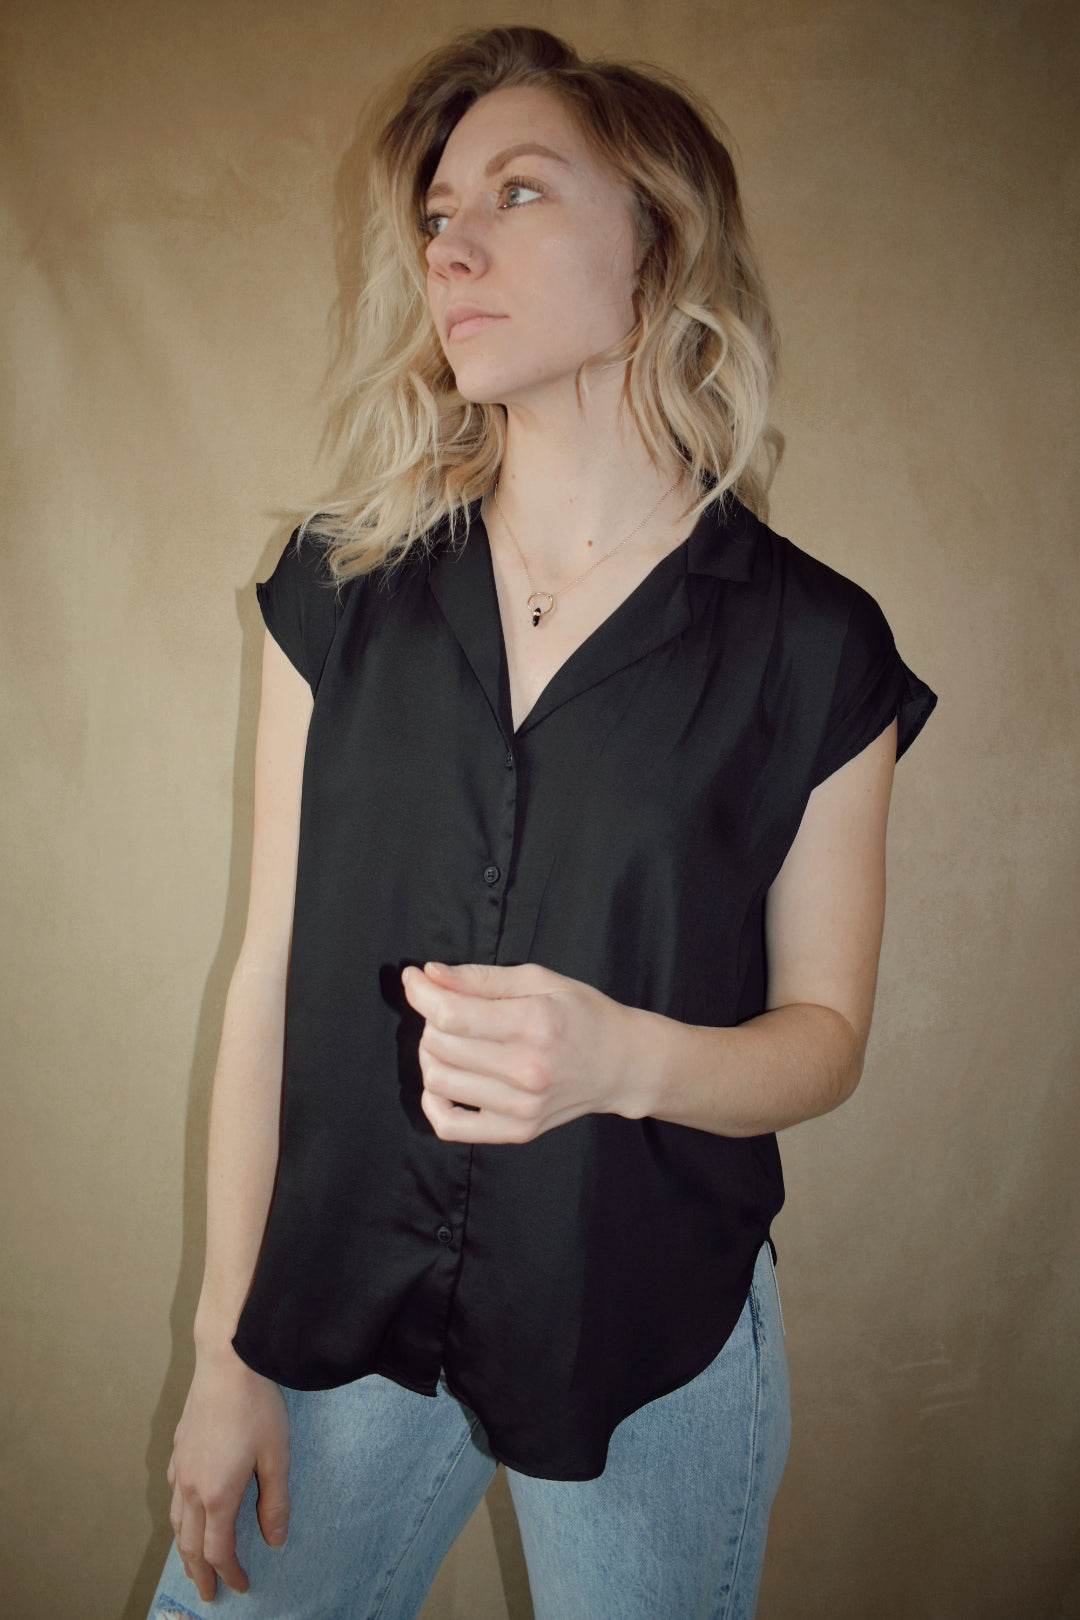 Light weight black button down scooped hemline full length blouse with collar and cap sleeves. Brand is Miou Muse. 